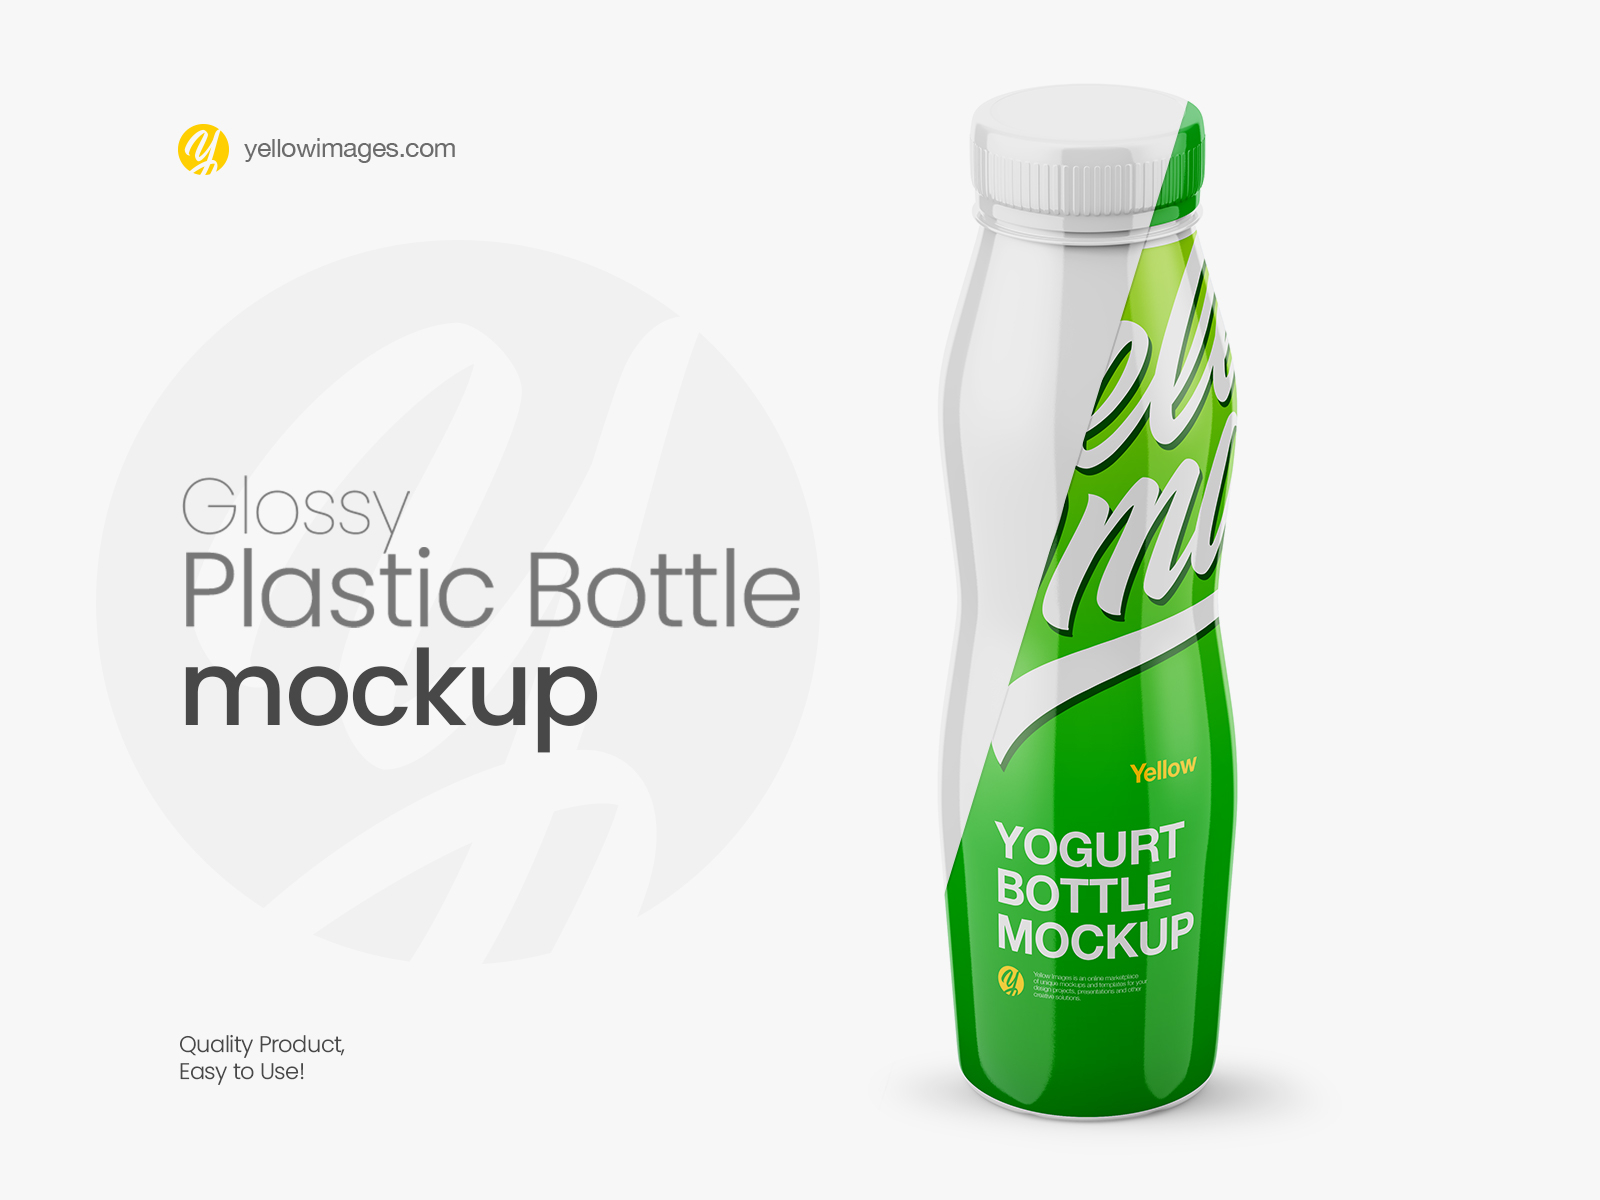 Download Bottle Box Packaging Mockup Download Free And Premium Psd Mockup Templates And Design Assets Yellowimages Mockups